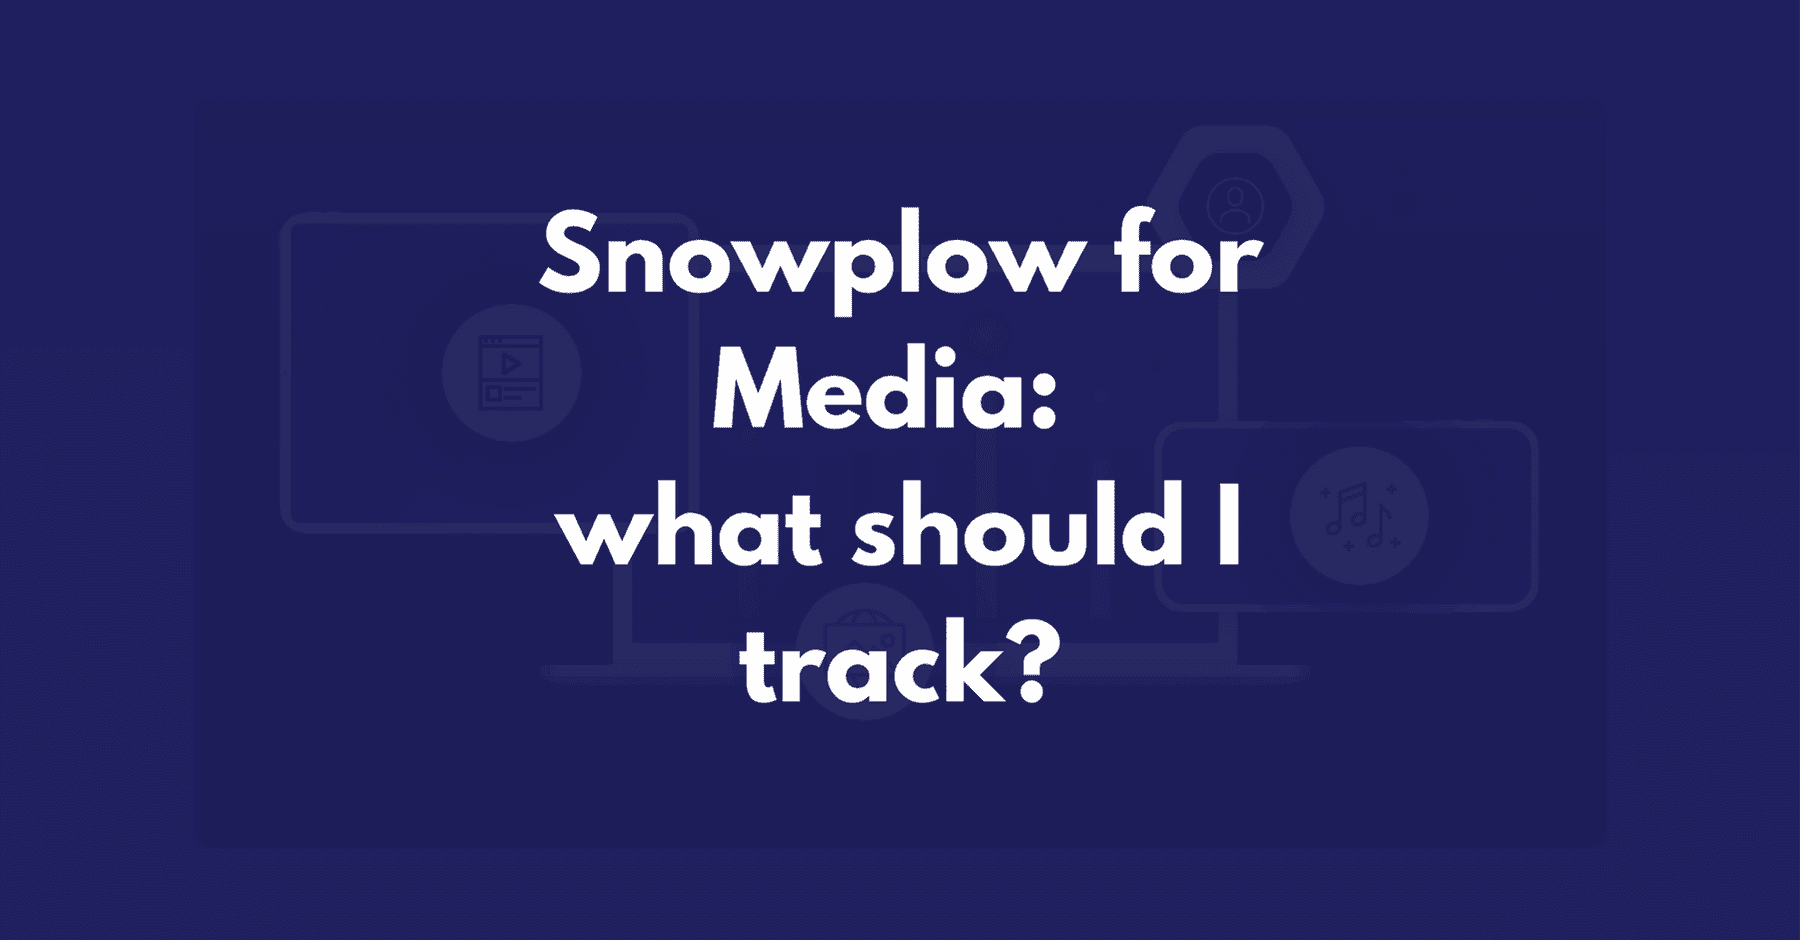 Snowplow for media part 2: what should I track?